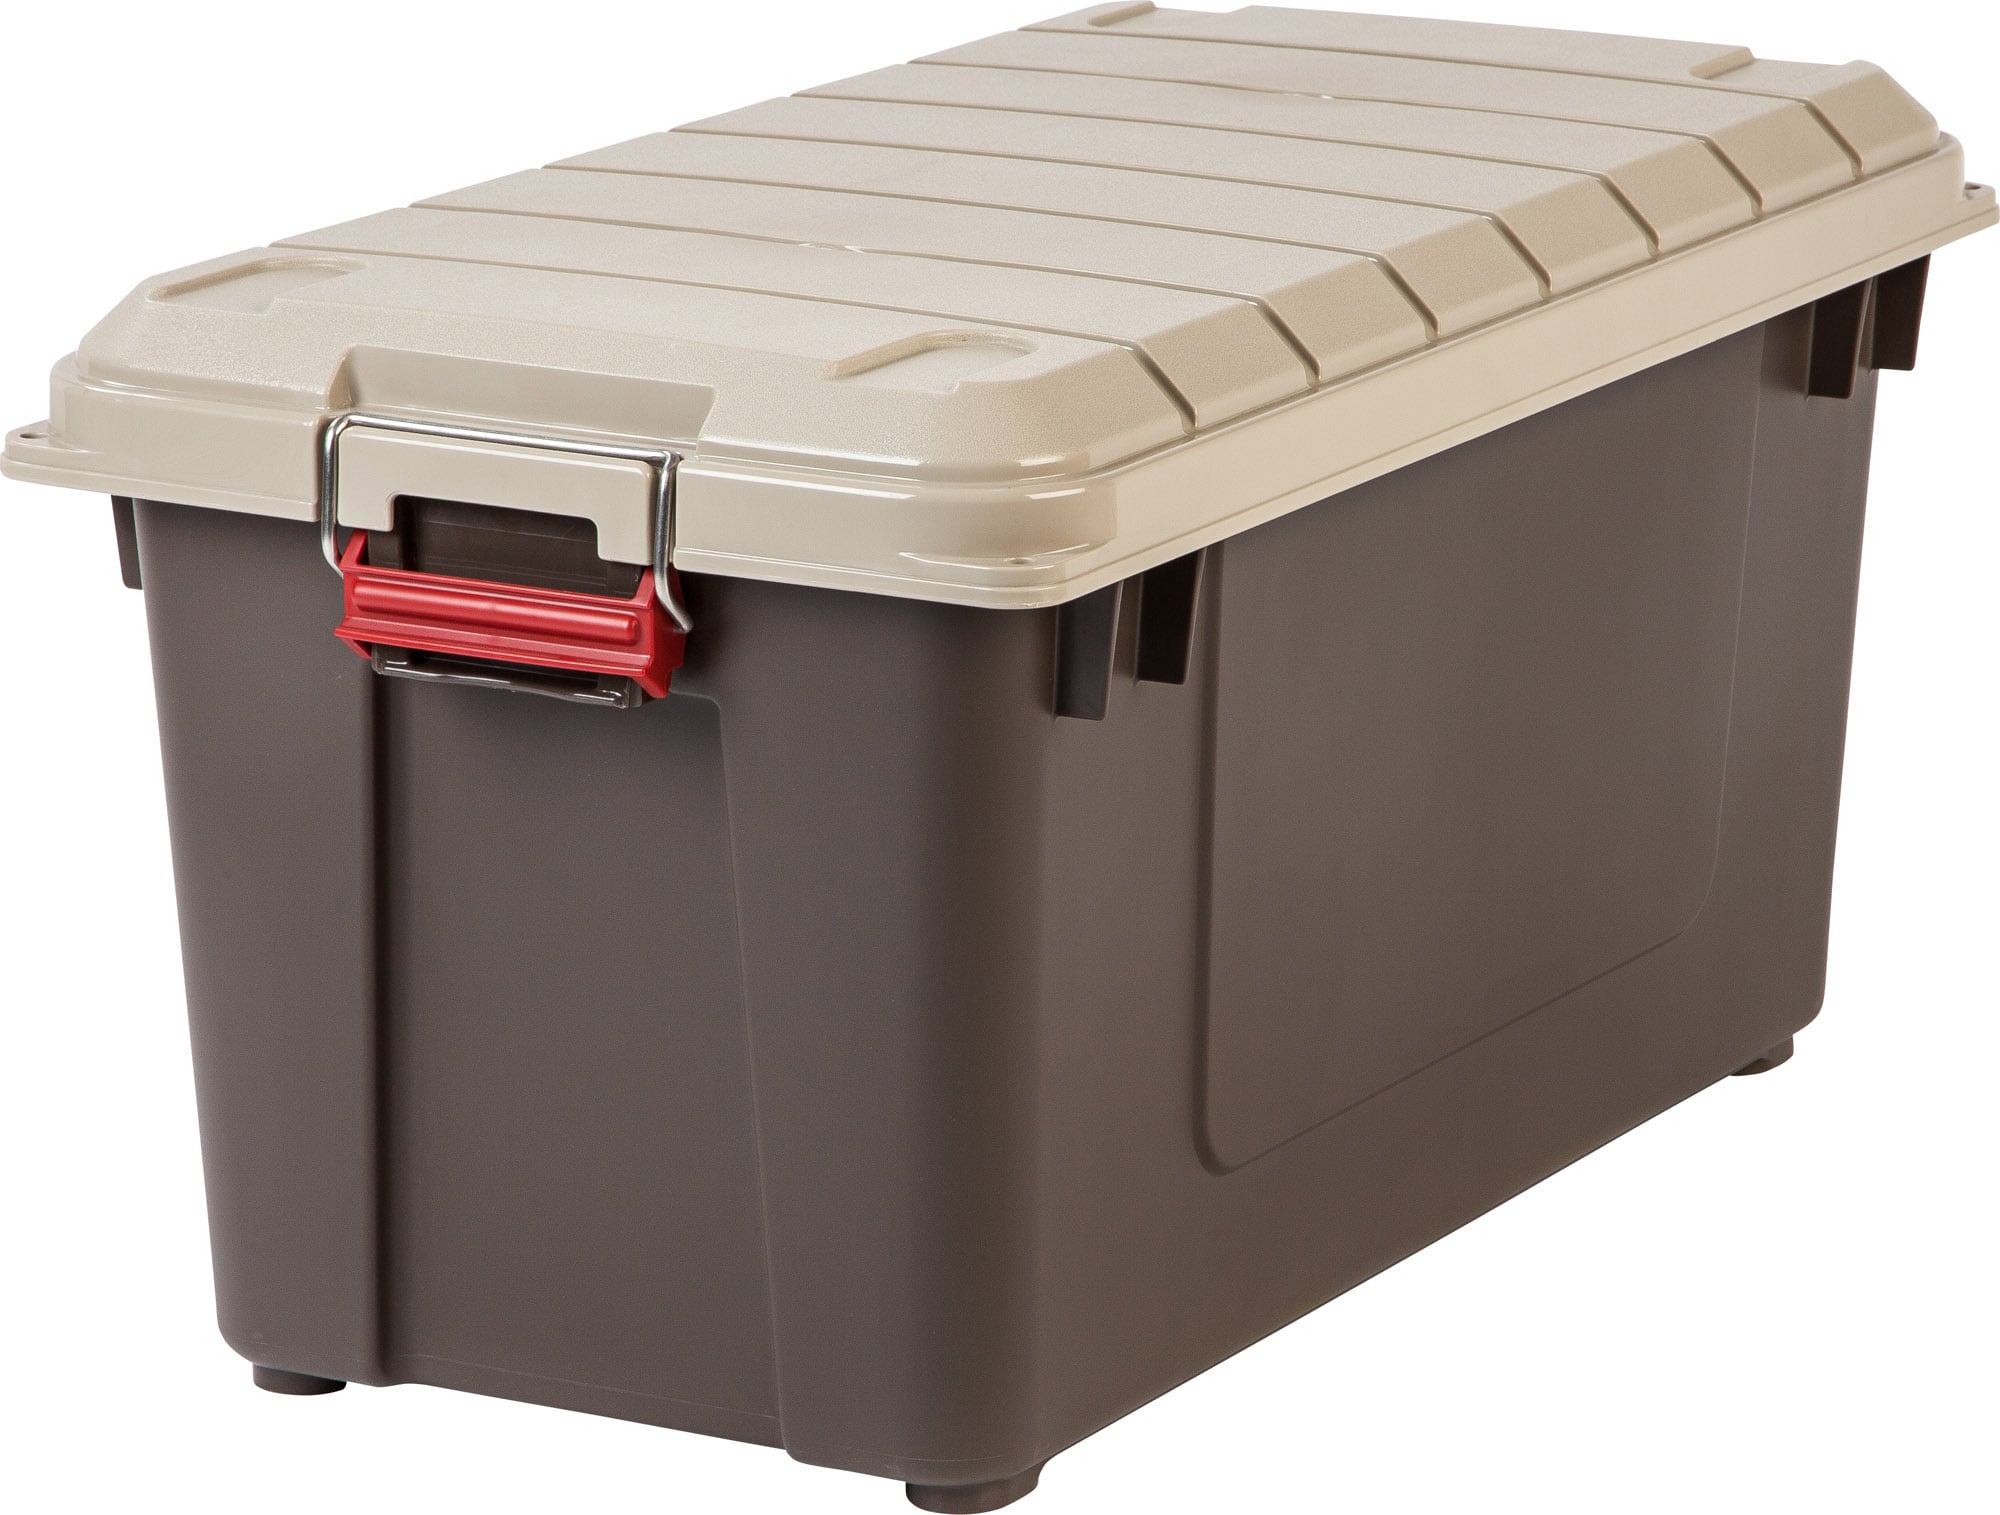 Sterilite Adult 40 Gallon Metal Wheeled Industrial Storage Box Tote, Black, 2 Count, Size: 36 3/4 Large x 21 3/8 W x 18 H